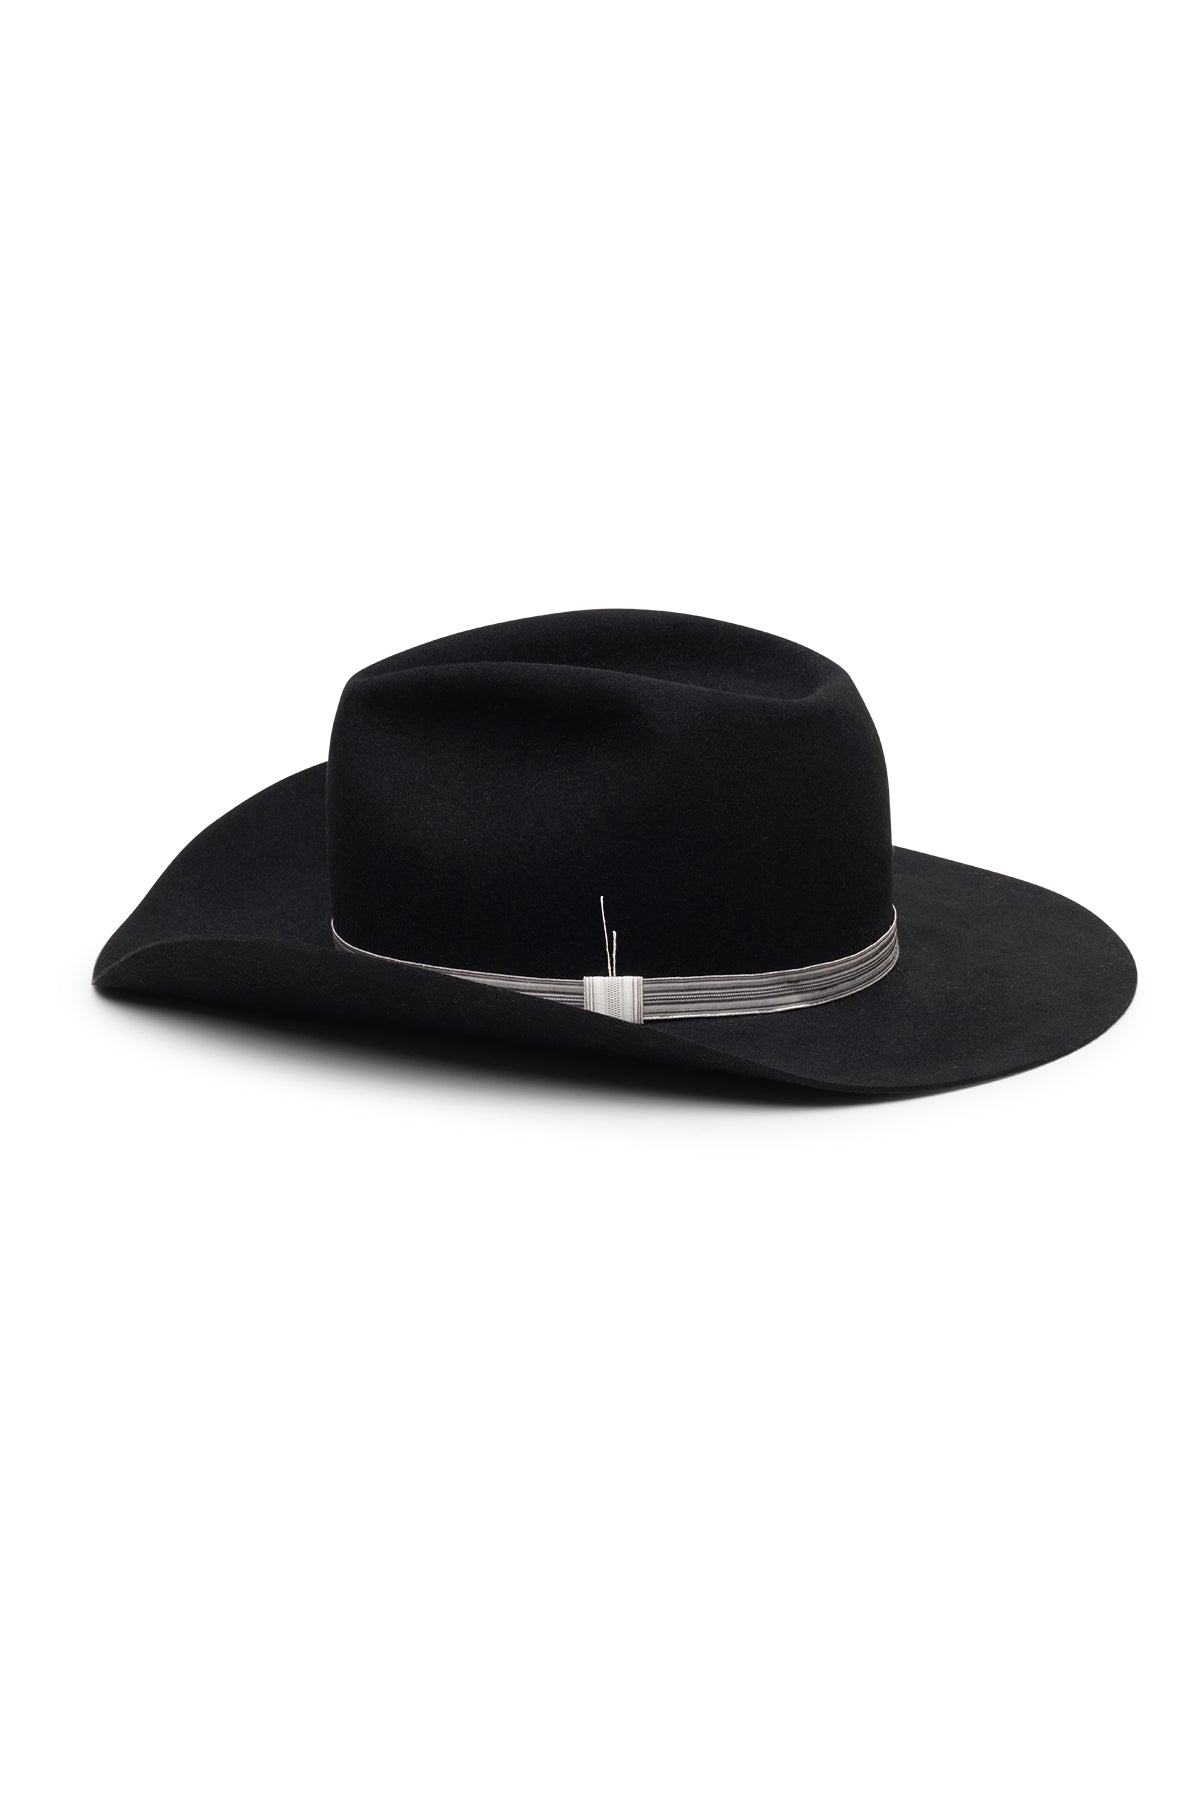 Unisex black western fur felt hat with flanged wide brim and fedora pinch, vintage silver band detail, handcrafted by SoonNoon in Stockholm